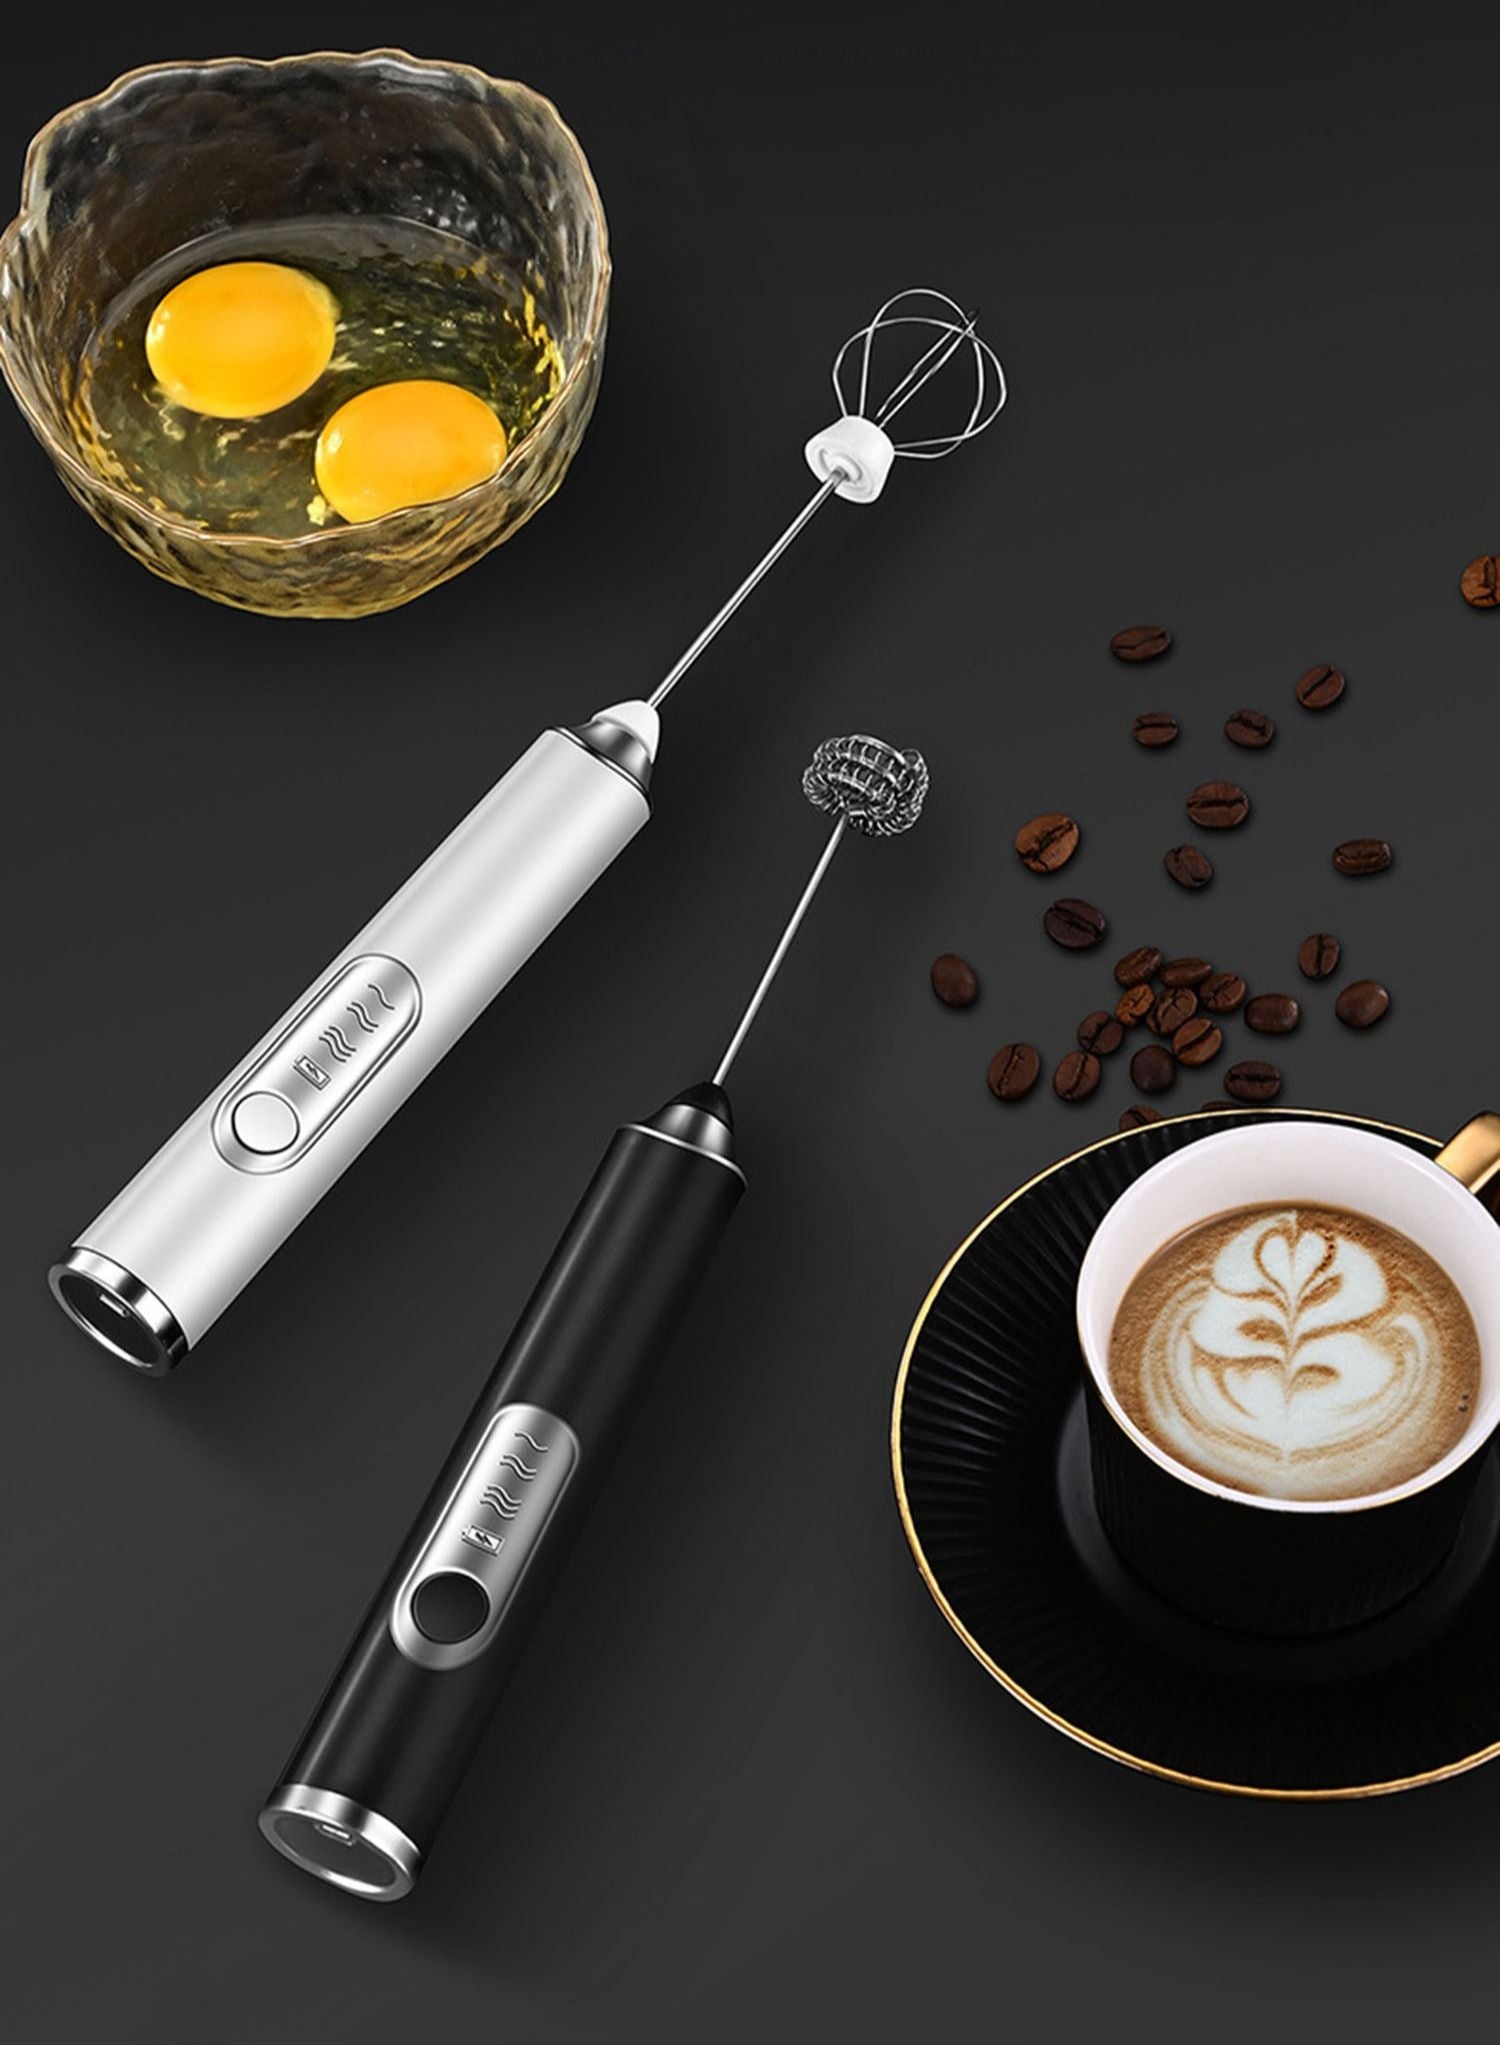 Electric Milk Frother Handheld Electric Whisk Coffee Frother Egg Beater Milk Cappuccino Latte Frother Drink Mixer Kitchen Tools Black